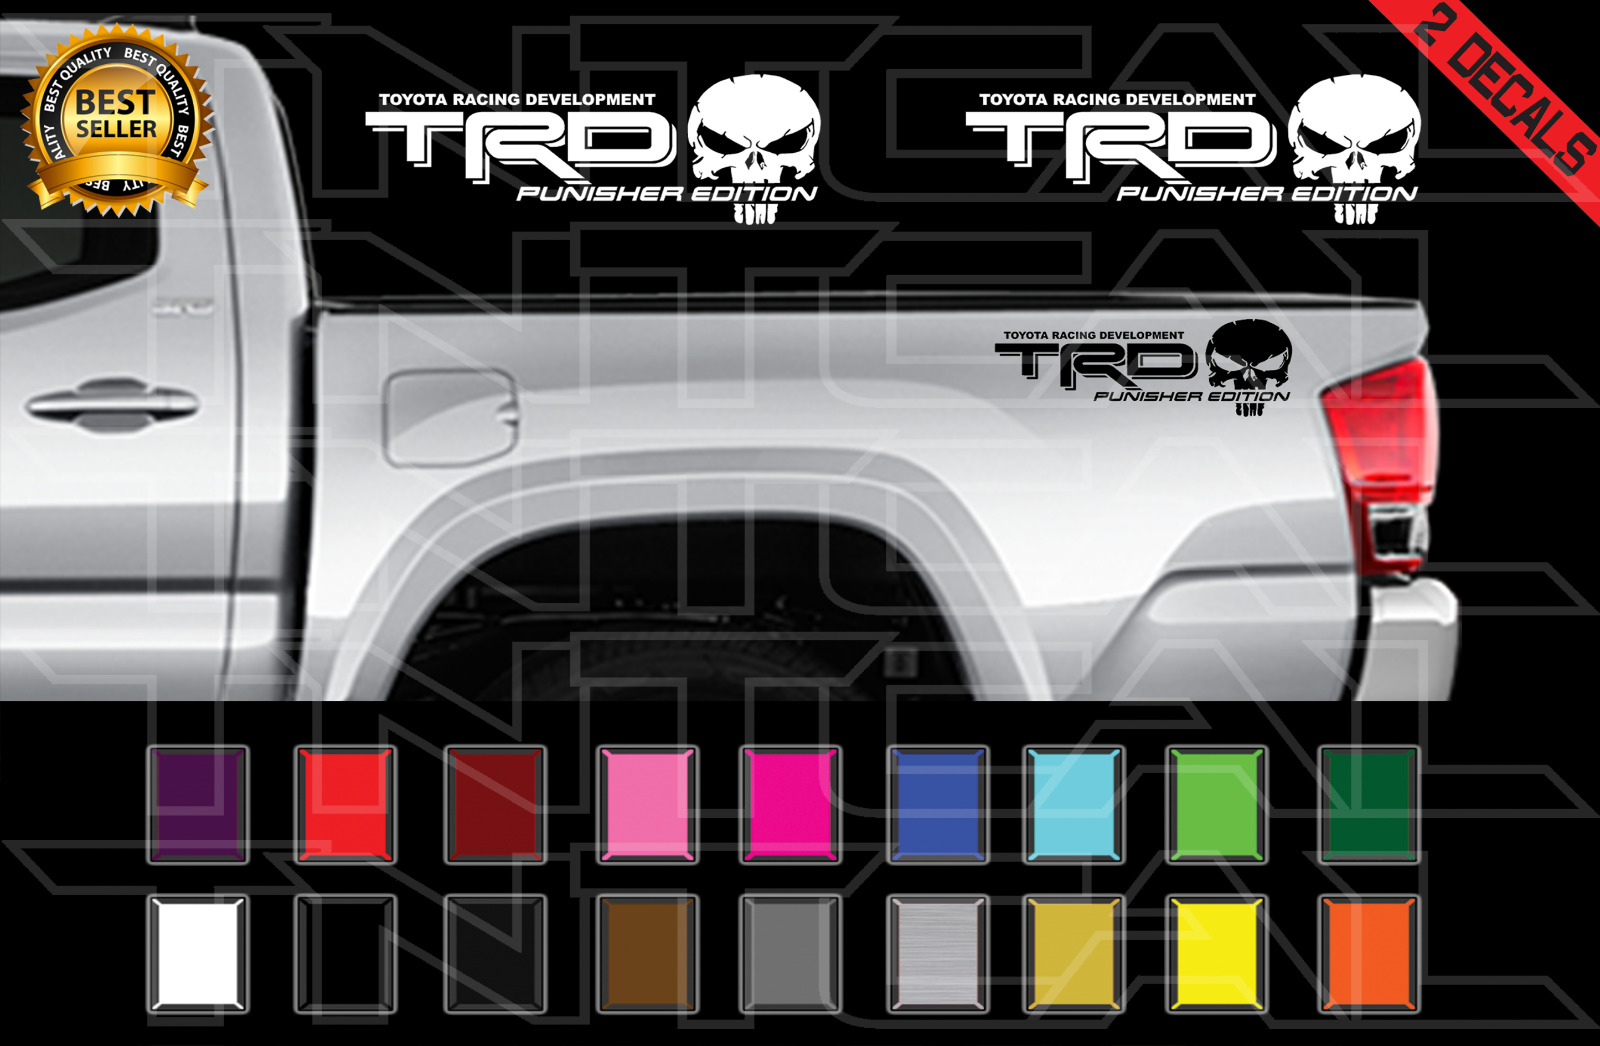 TRD PUNISHER EDITION Decals Toyota Tacoma Tundra Truck Vinyl Stickers X2